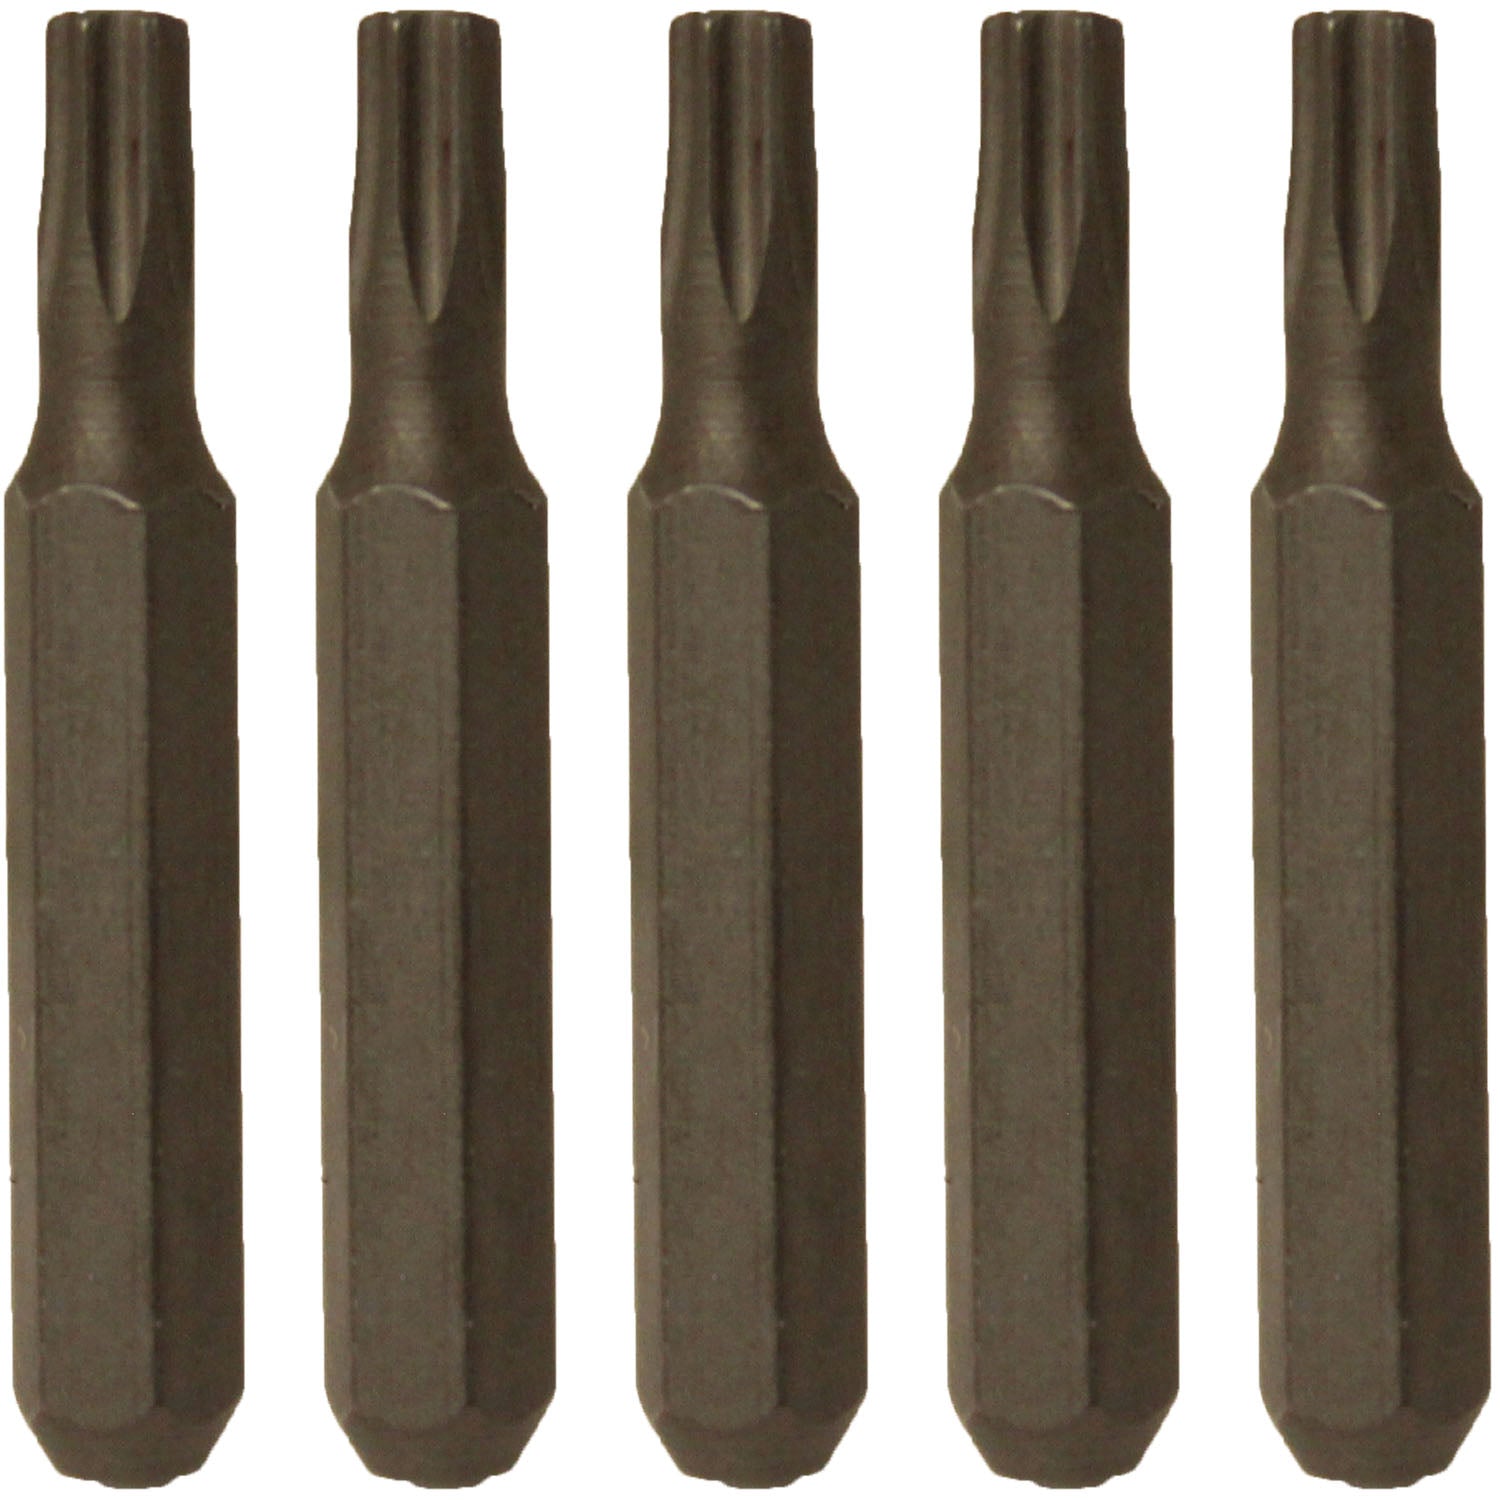 Dill 5415-1 T-10 Replacement Torx Bit for 5415 Torque Screwdriver Tool 5-Pack